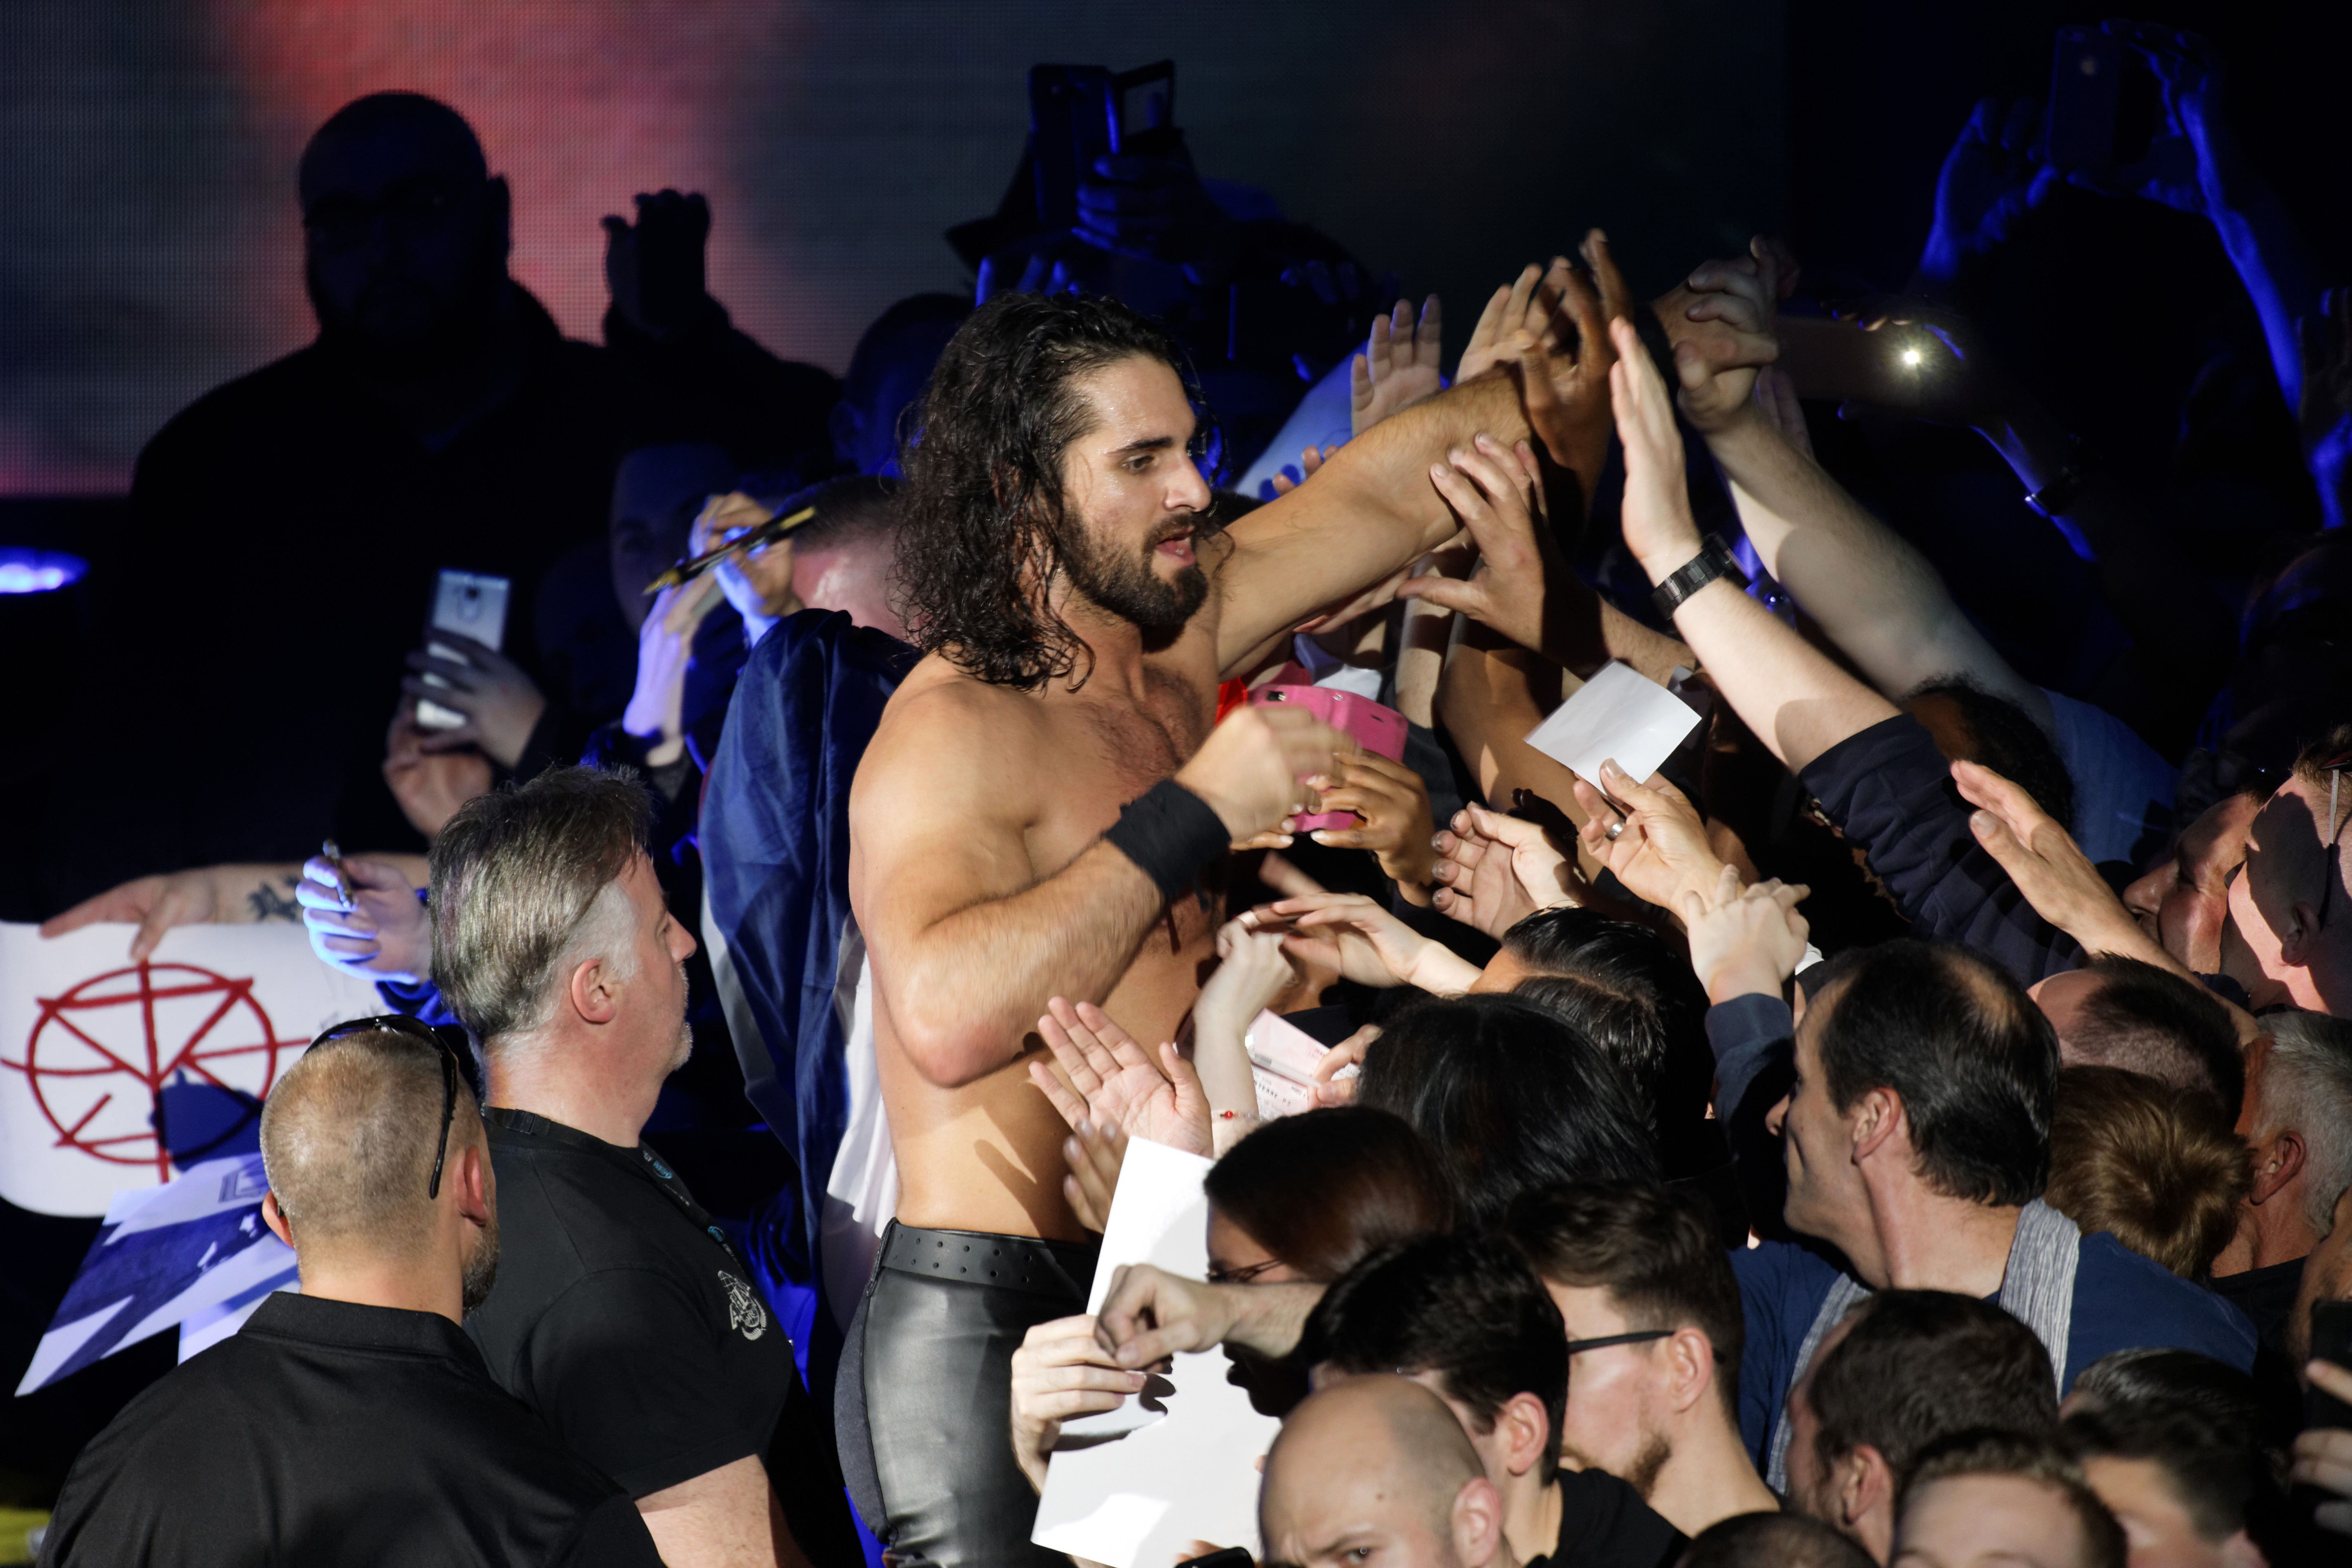 LILLE, FRANCE - MAY 09:  Seth Rollins greets supporters after fighting during WWE Live 2017 at Zenith Arena on May 9, 2017 in Lille, France.  (Photo by Sylvain Lefevre/Getty Images)